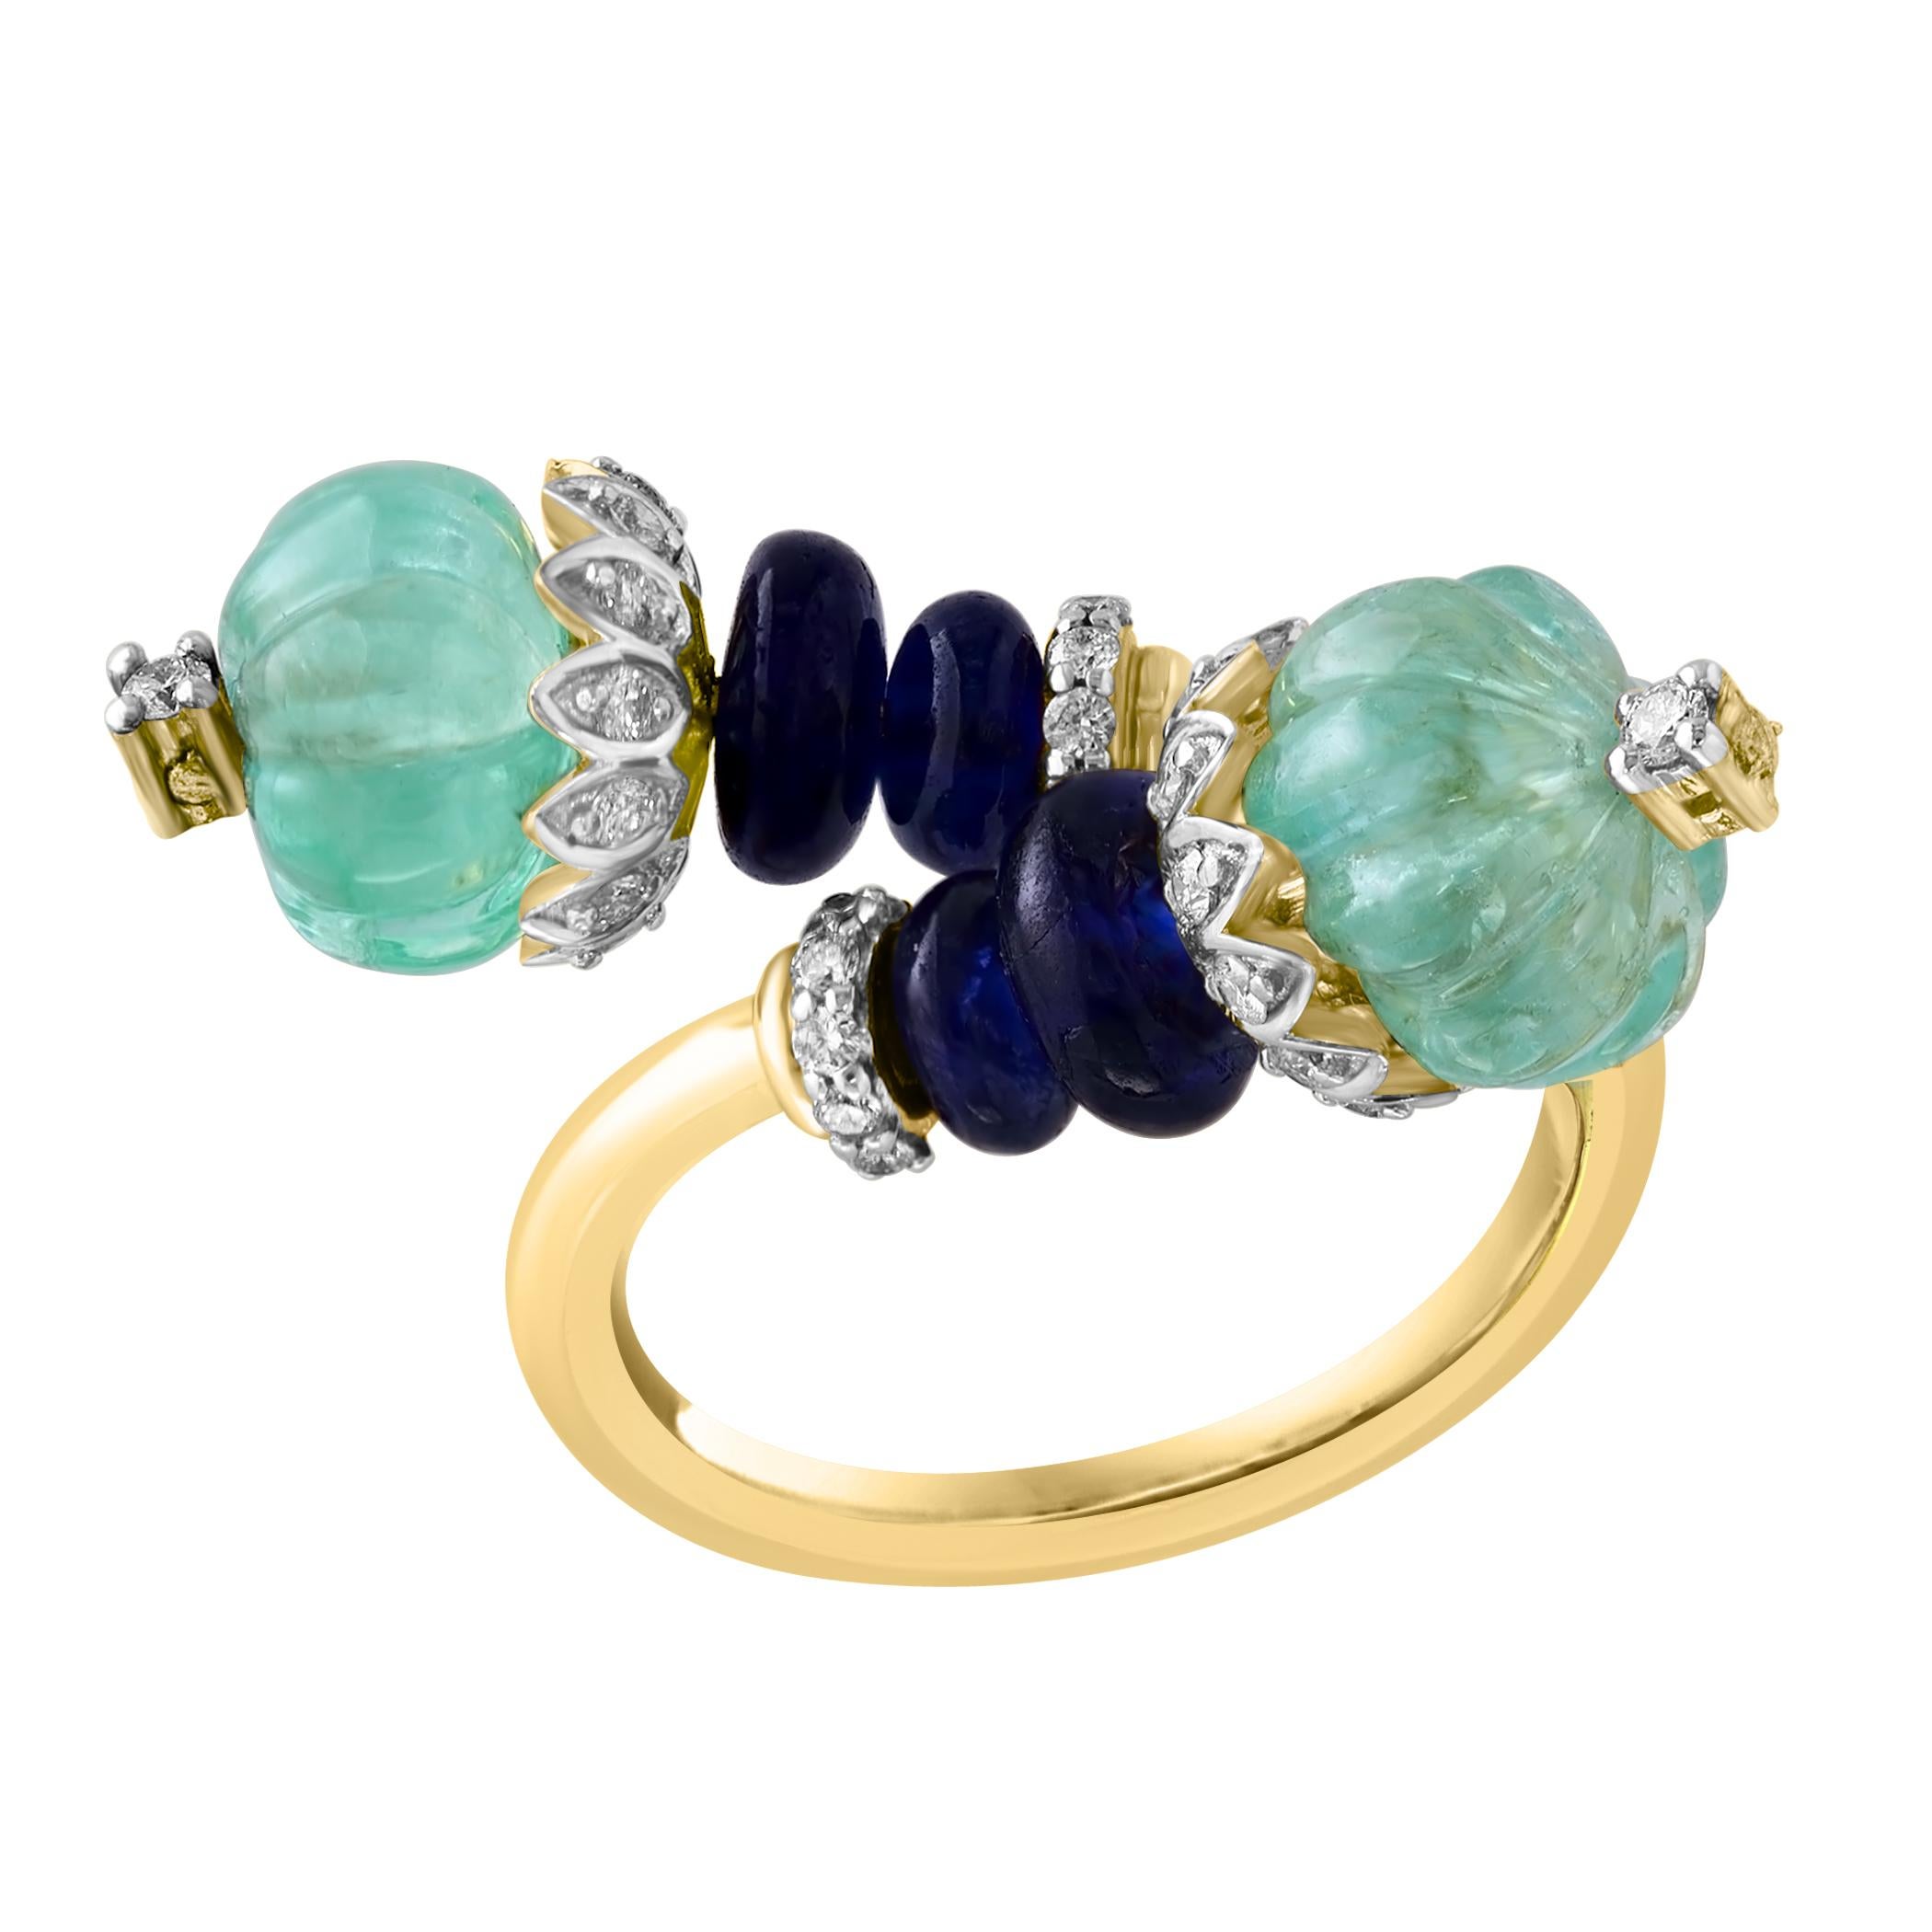 Presenting a timeless beauty, the 5 Ct Emerald Bead & 2.5 Ct Sapphire Beads & Diamond Ring in 18 Kt Yellow Gold, Size 5, is a classic piece that exudes elegance. This ring features two stunning Emerald Beads in melon shape  of exceptional quality ,